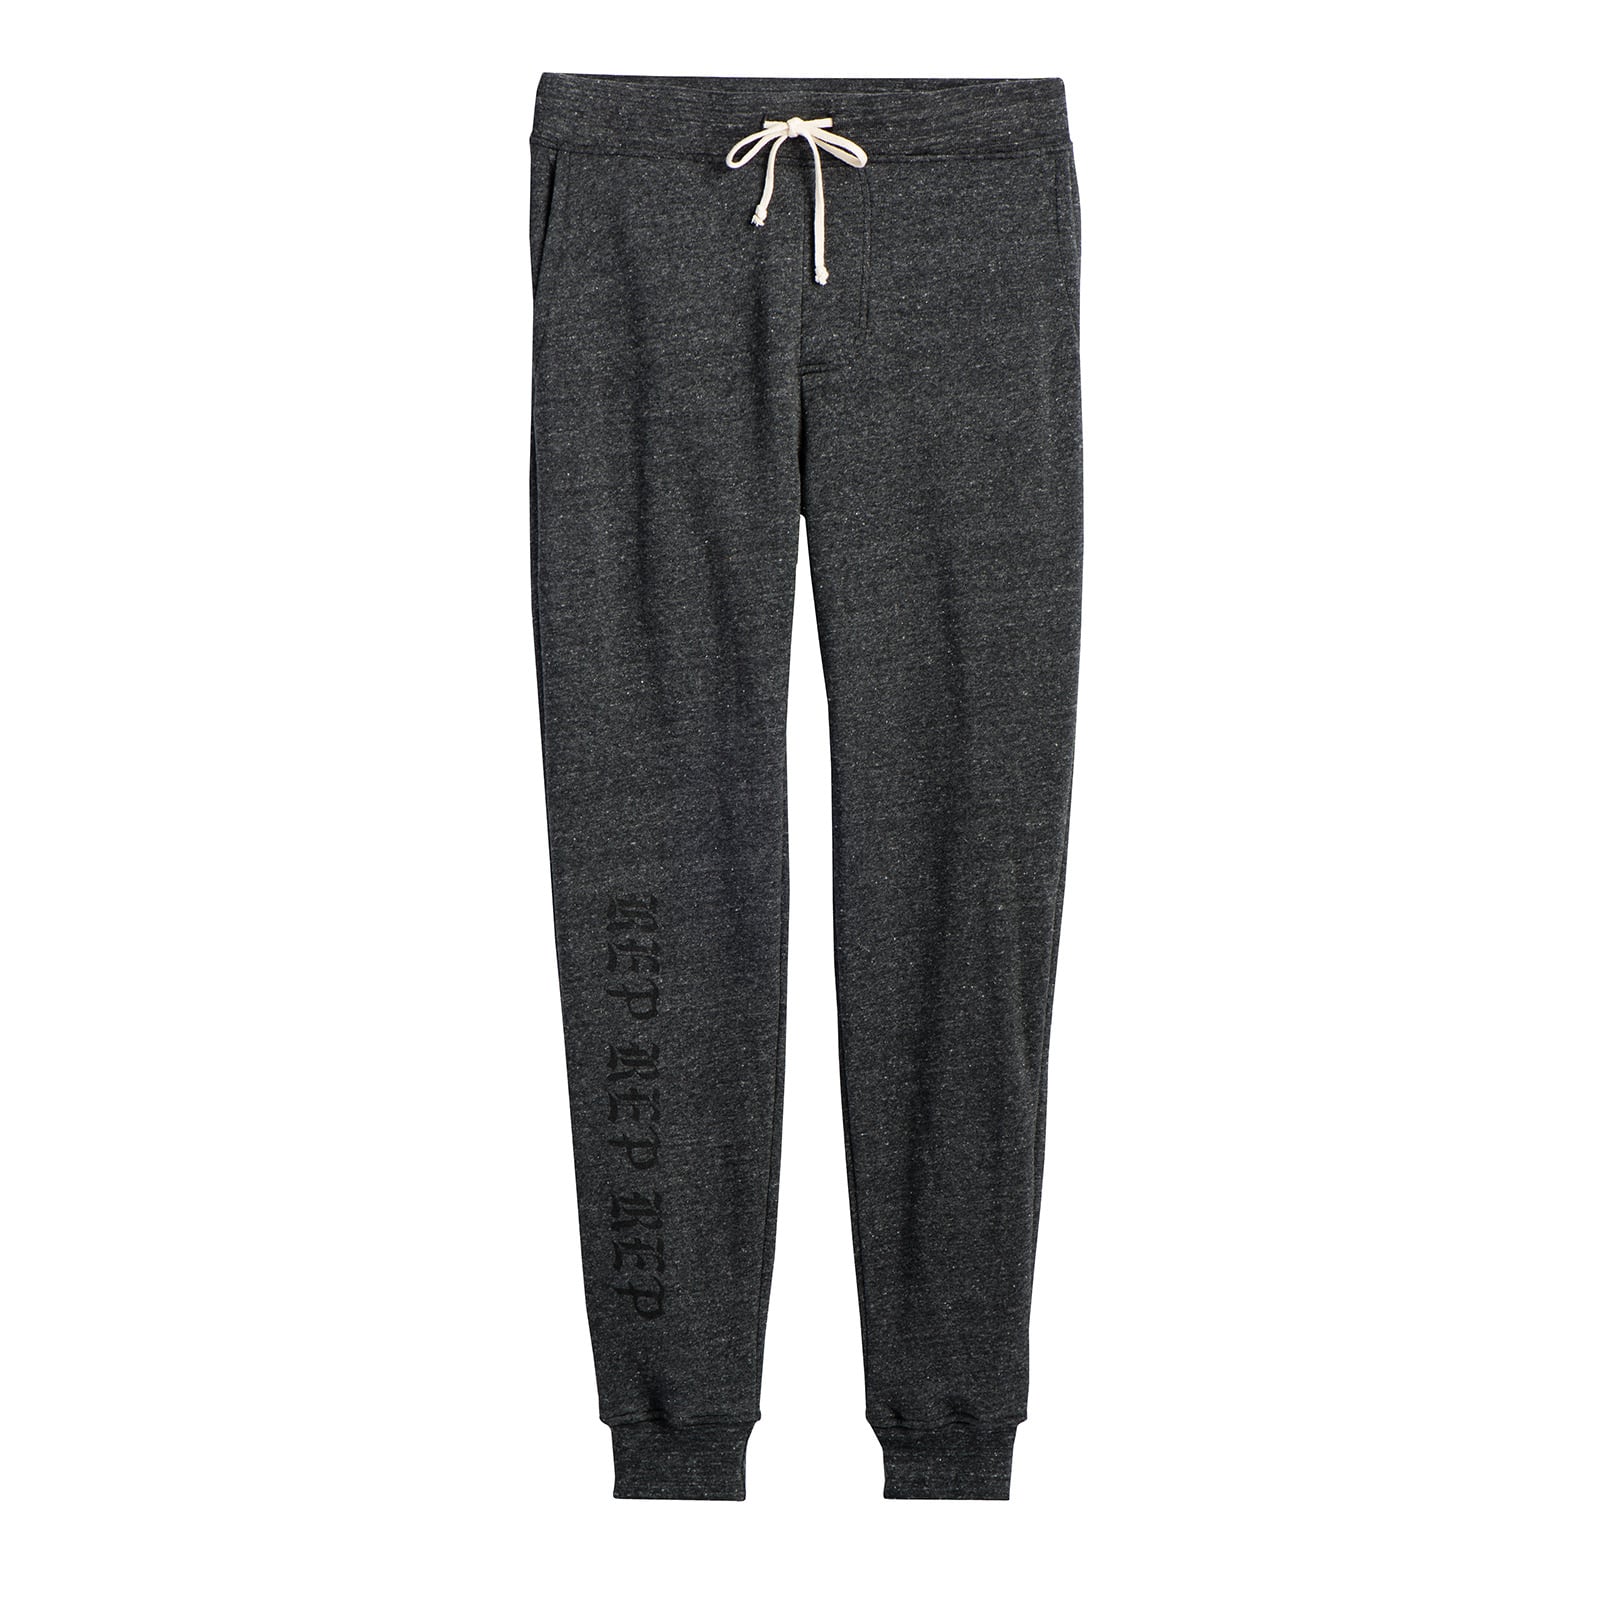 Men's Charcoal Sweatpants | 75 Taylor Swift Gifts to Help You Get 